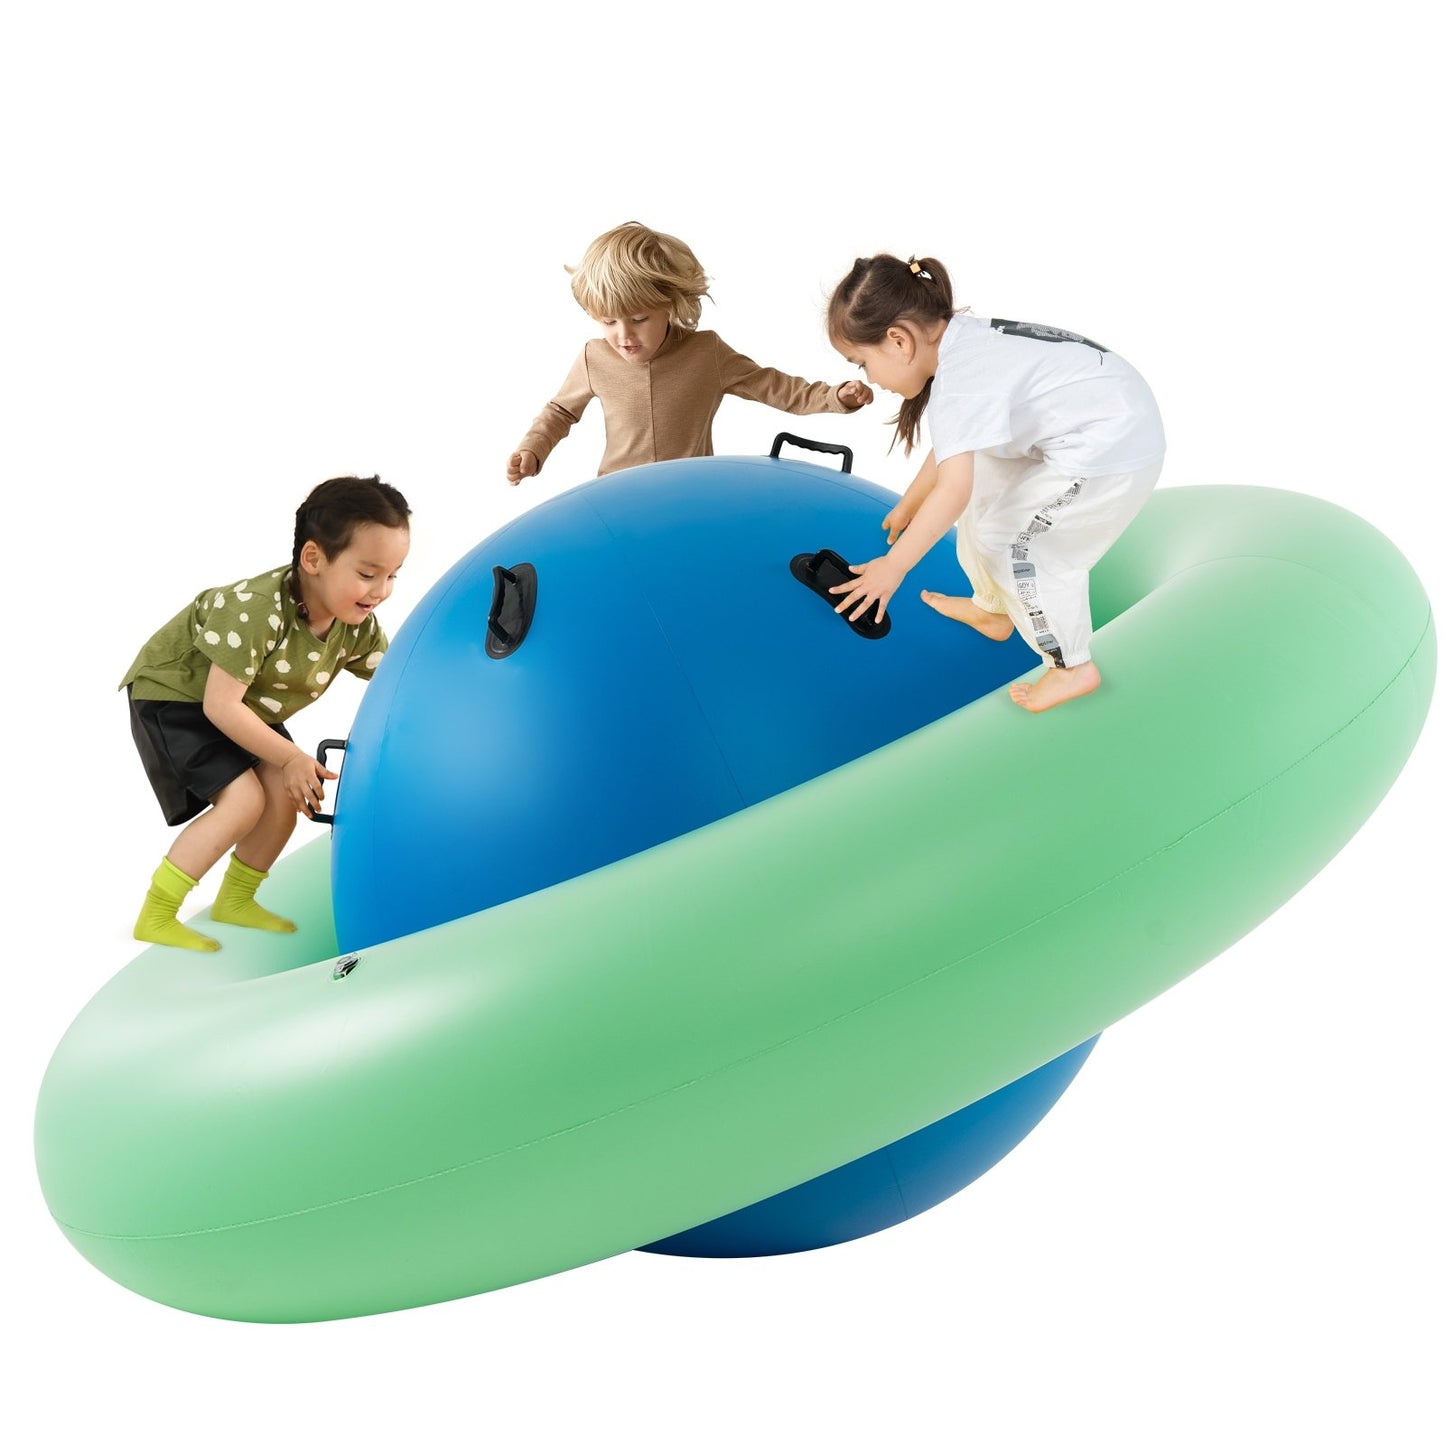 7.5 Foot Giant Inflatable Dome Rocker Bouncer with 6 Built-in Handles for Kids, Green at Gallery Canada